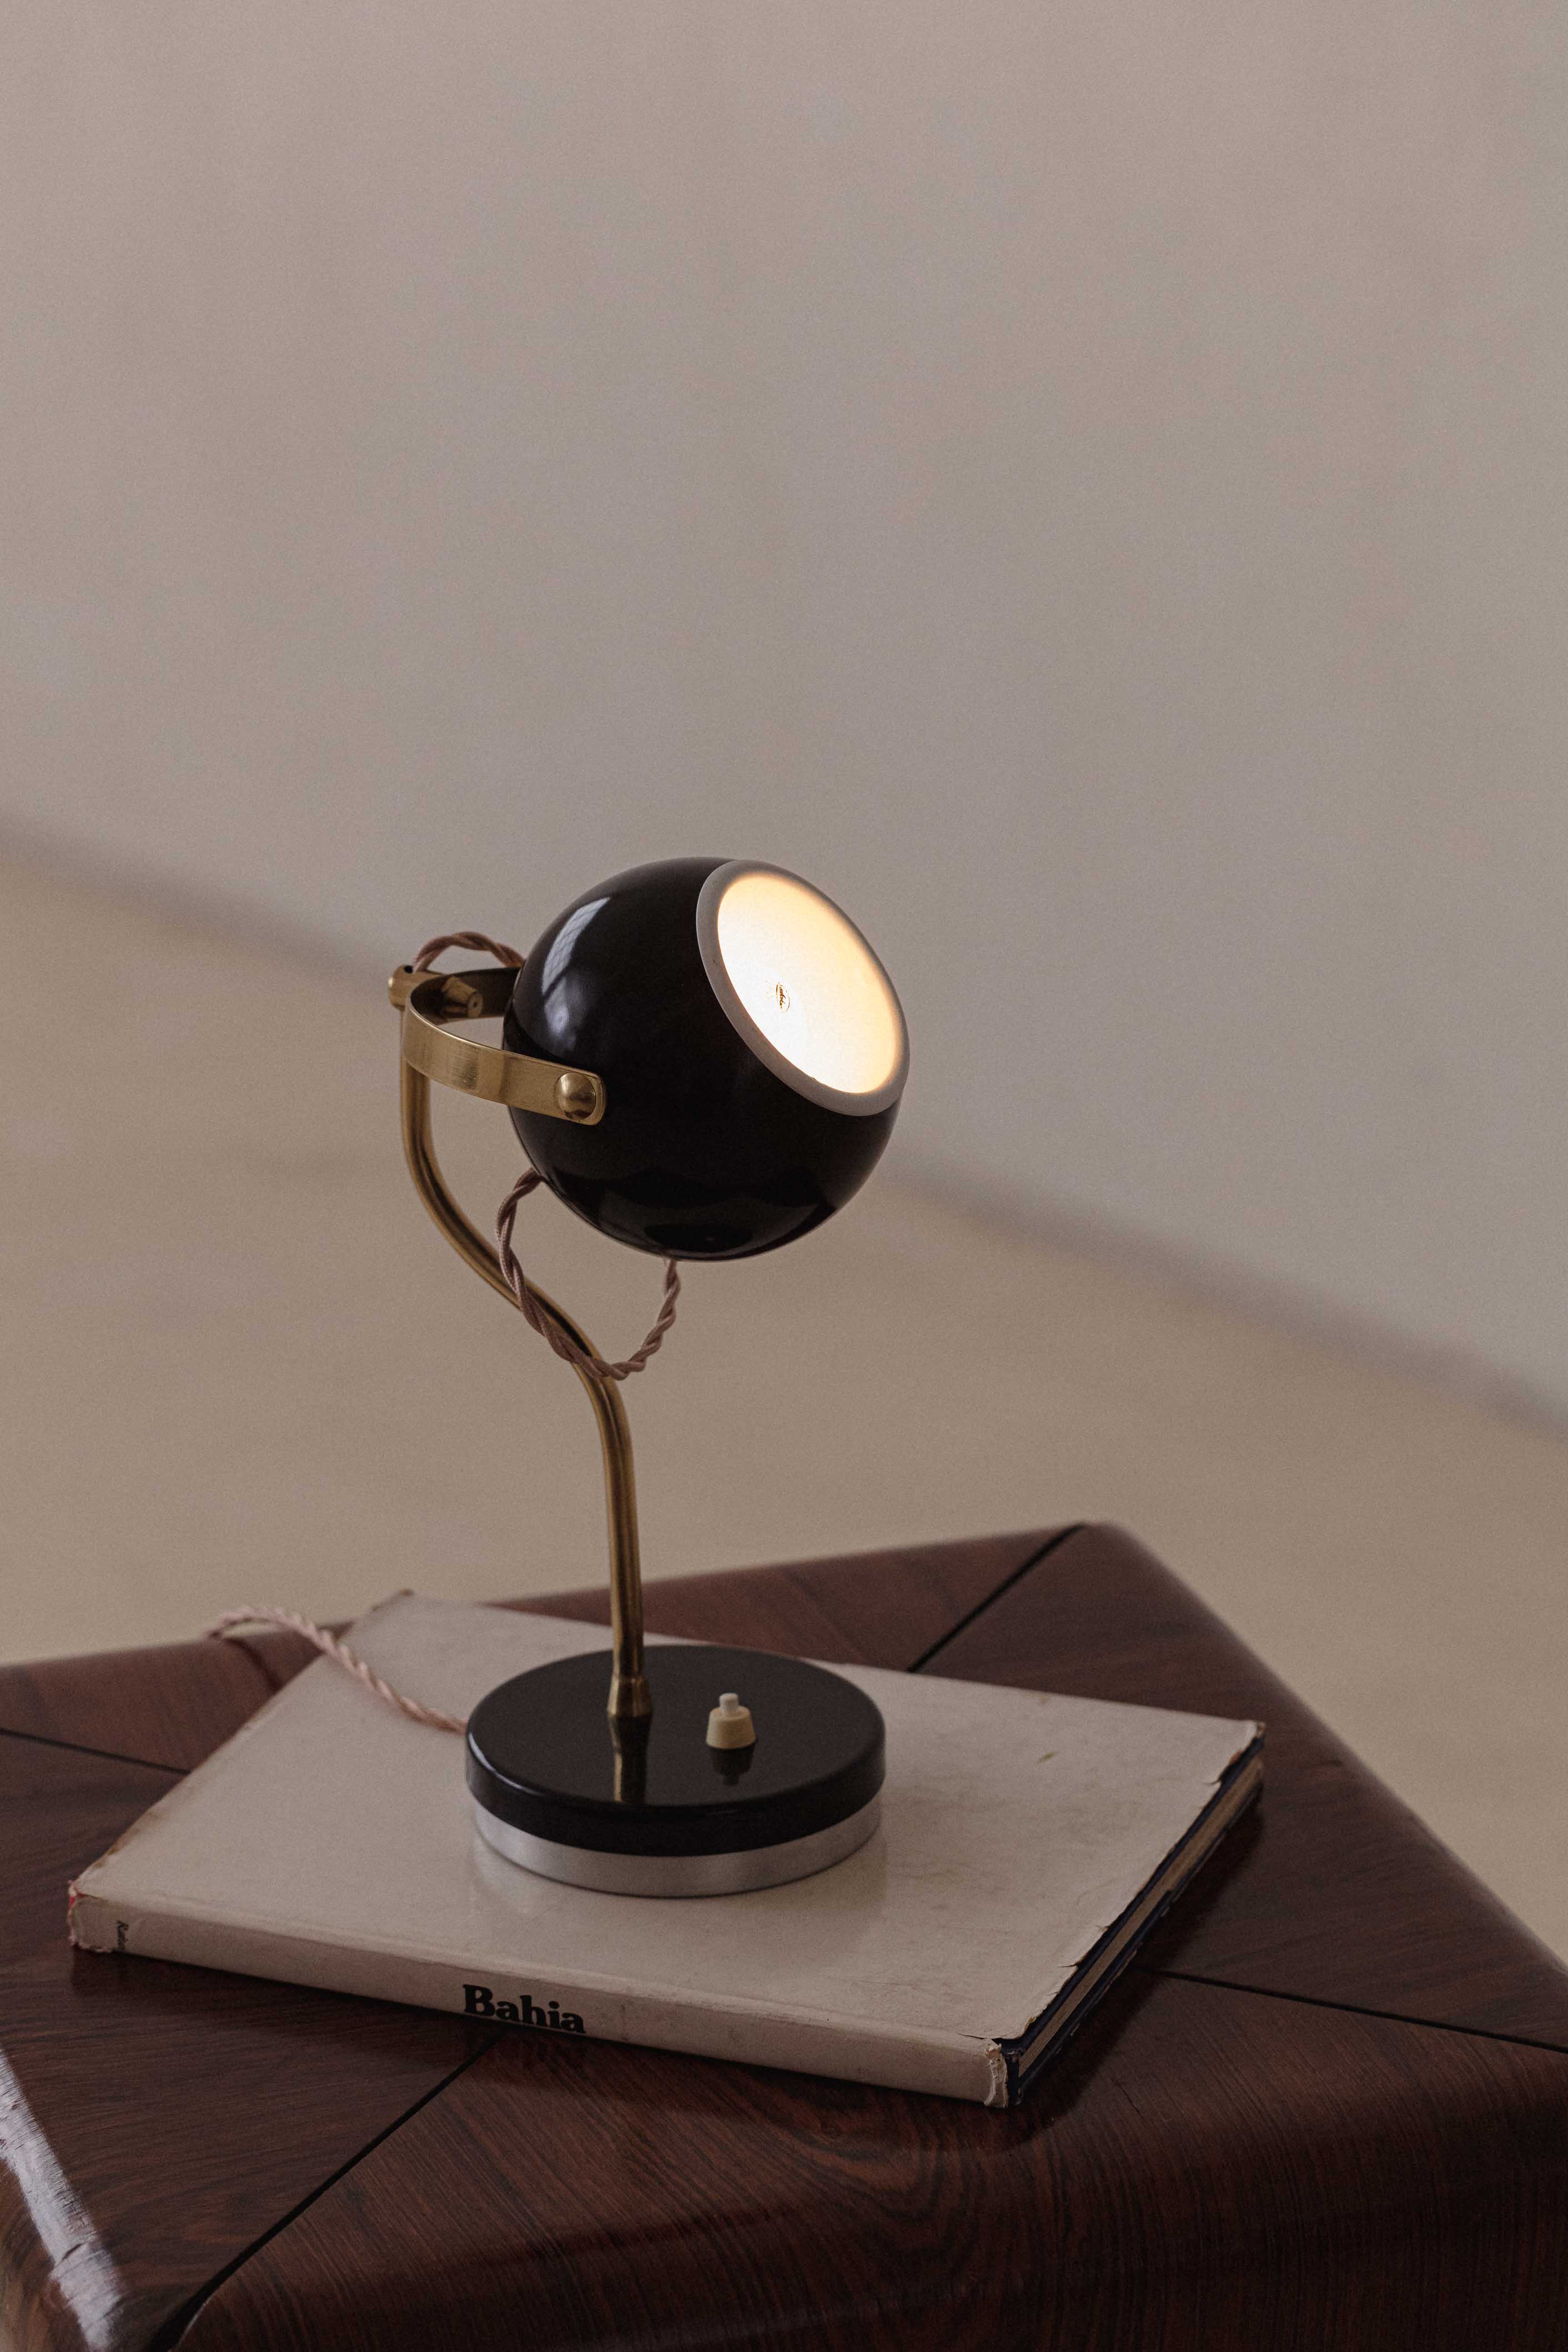 This fantastic table lamp was designed by Enrico Furio (1909-2010) and produced by Dominici, a Brazilian company of lighting objects created by the Italian designer Enrico Furio – who immigrated to Brazil in 1946 with Lina Bo Bardi (1914-1942) and